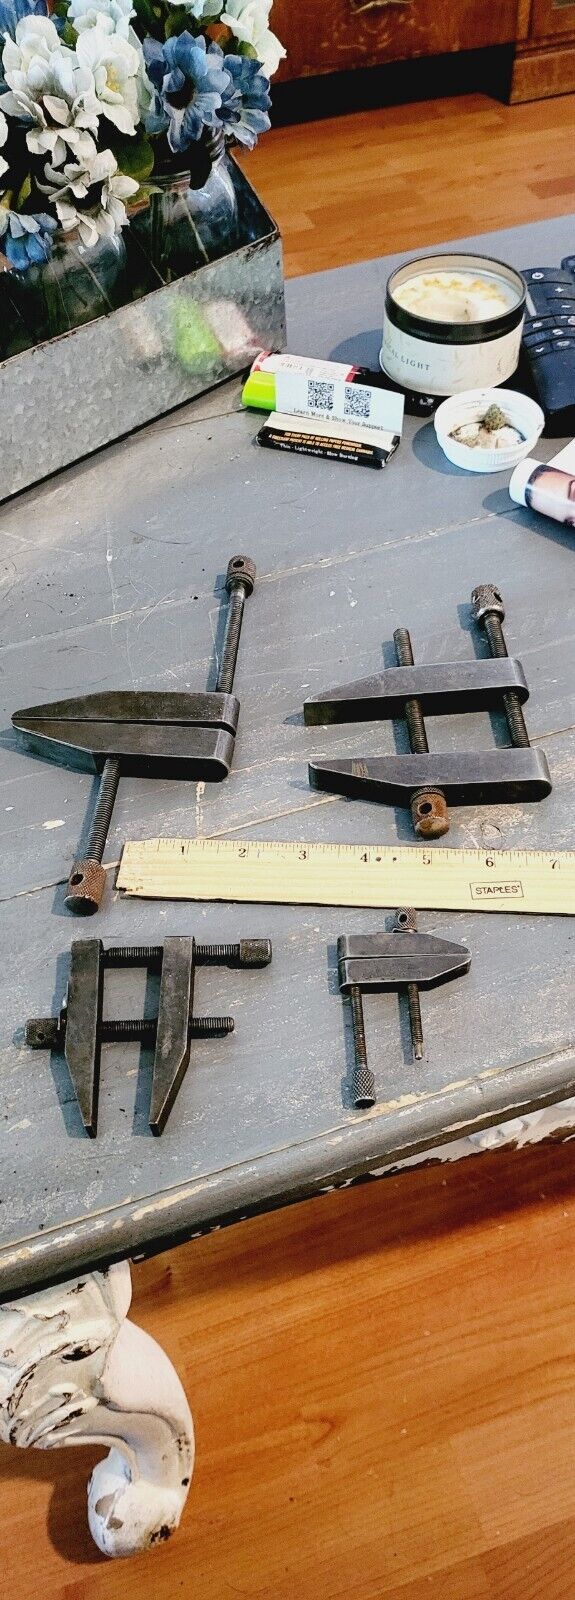 4 Vintage The L.S. Starrett CO. Parallel Machinist Clamps No. 161 USA 